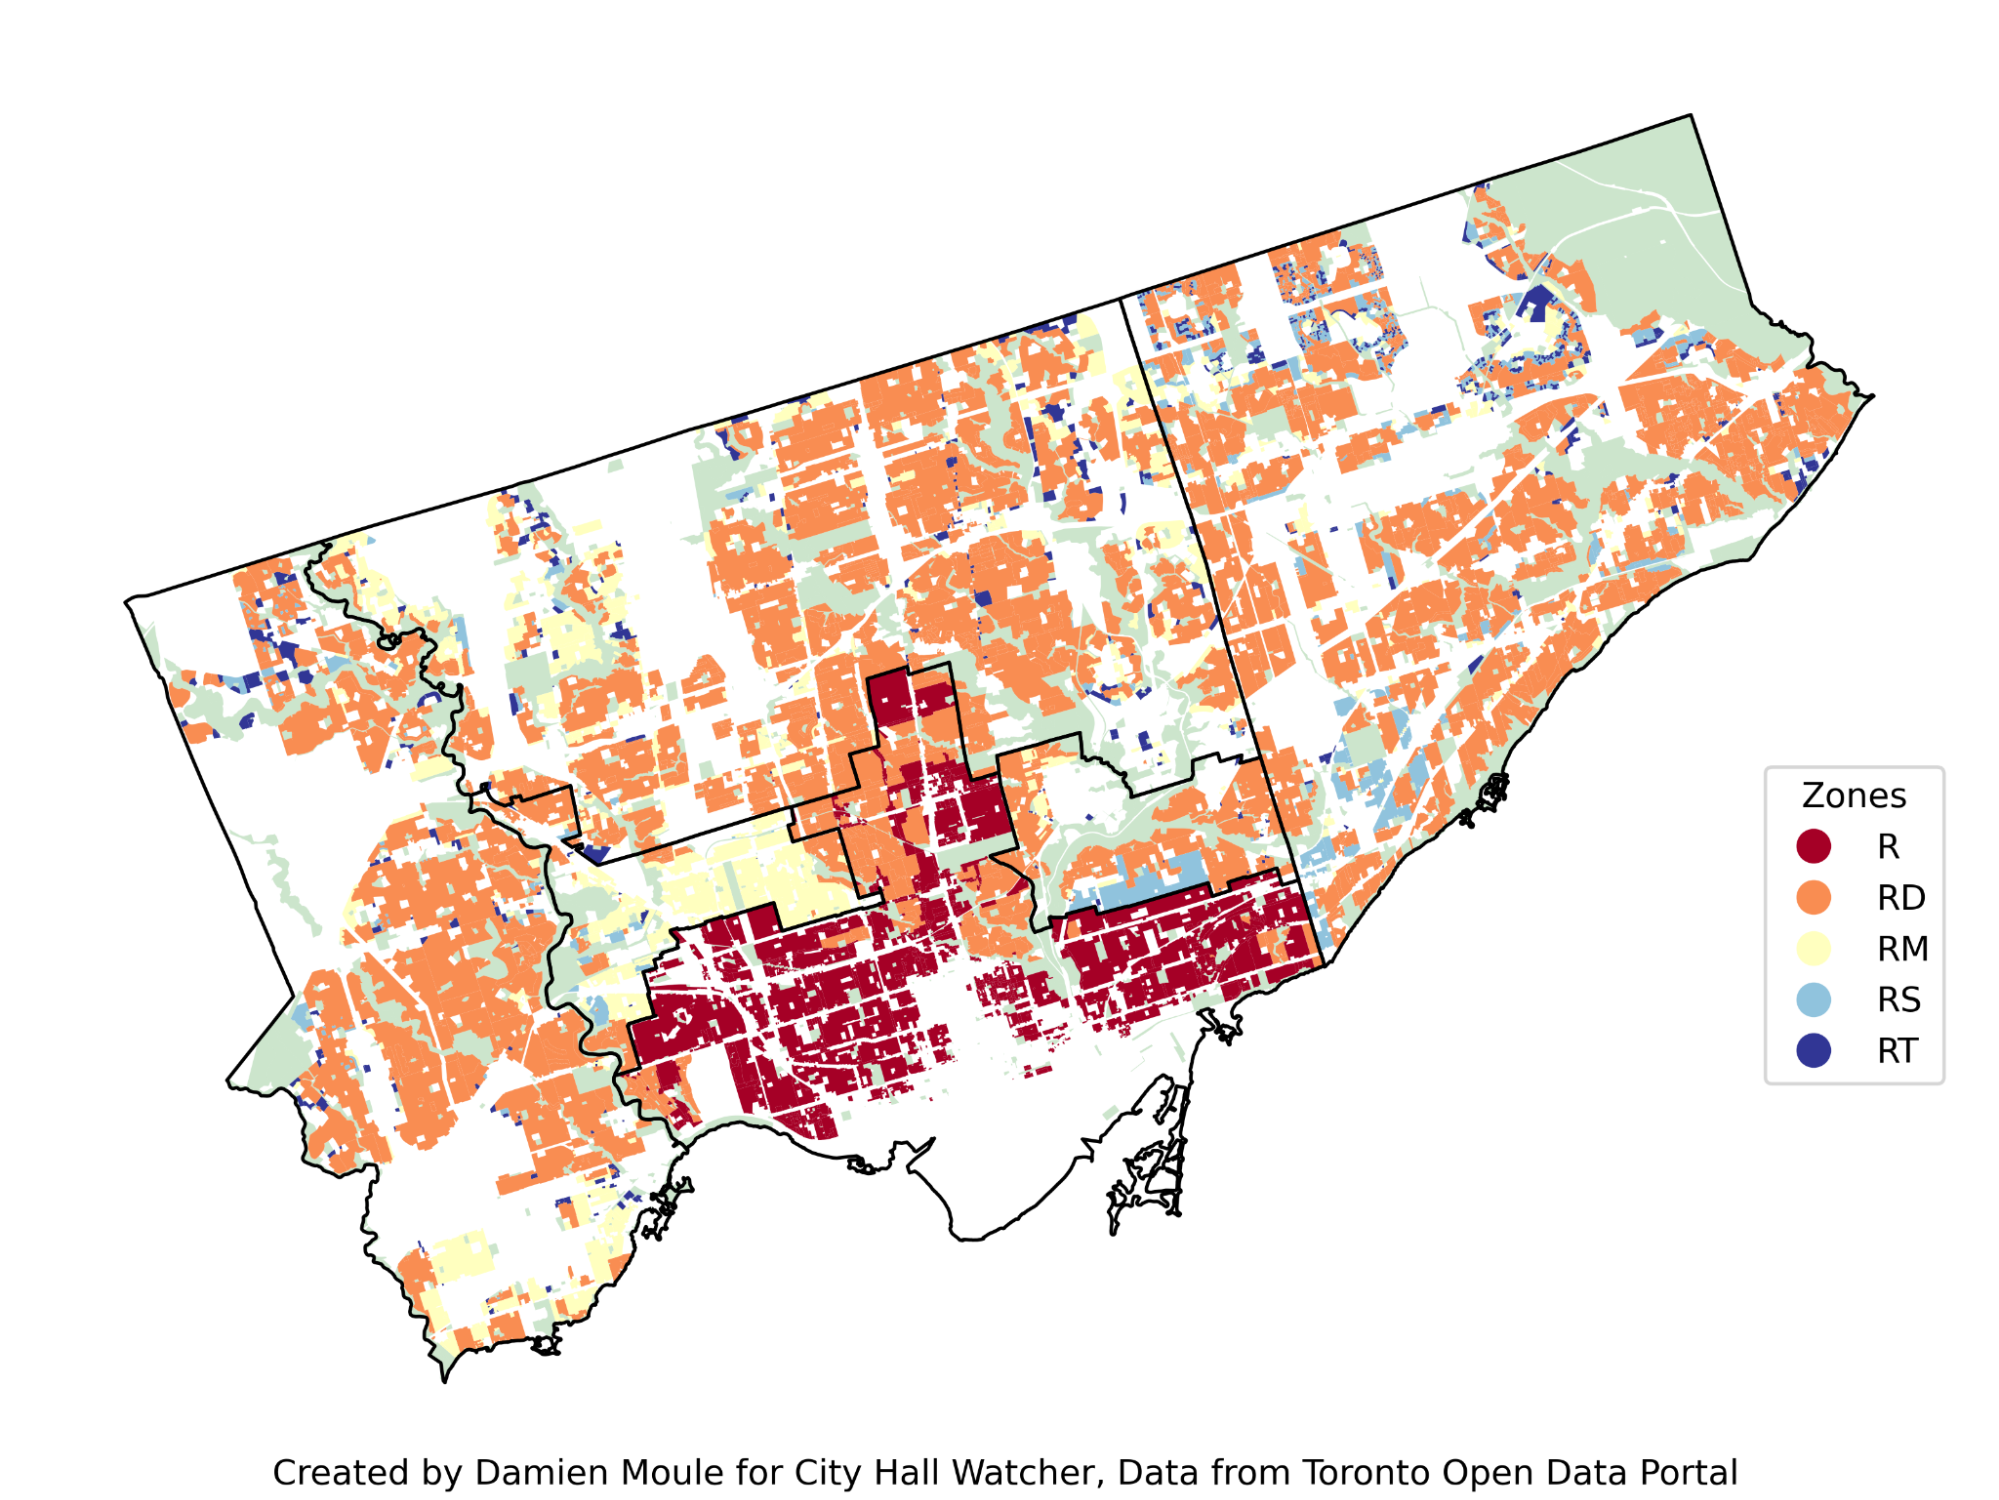 Zoning map for Toronto, showing much of the city under more restrictive "RD" zone where detached homes are prioritized